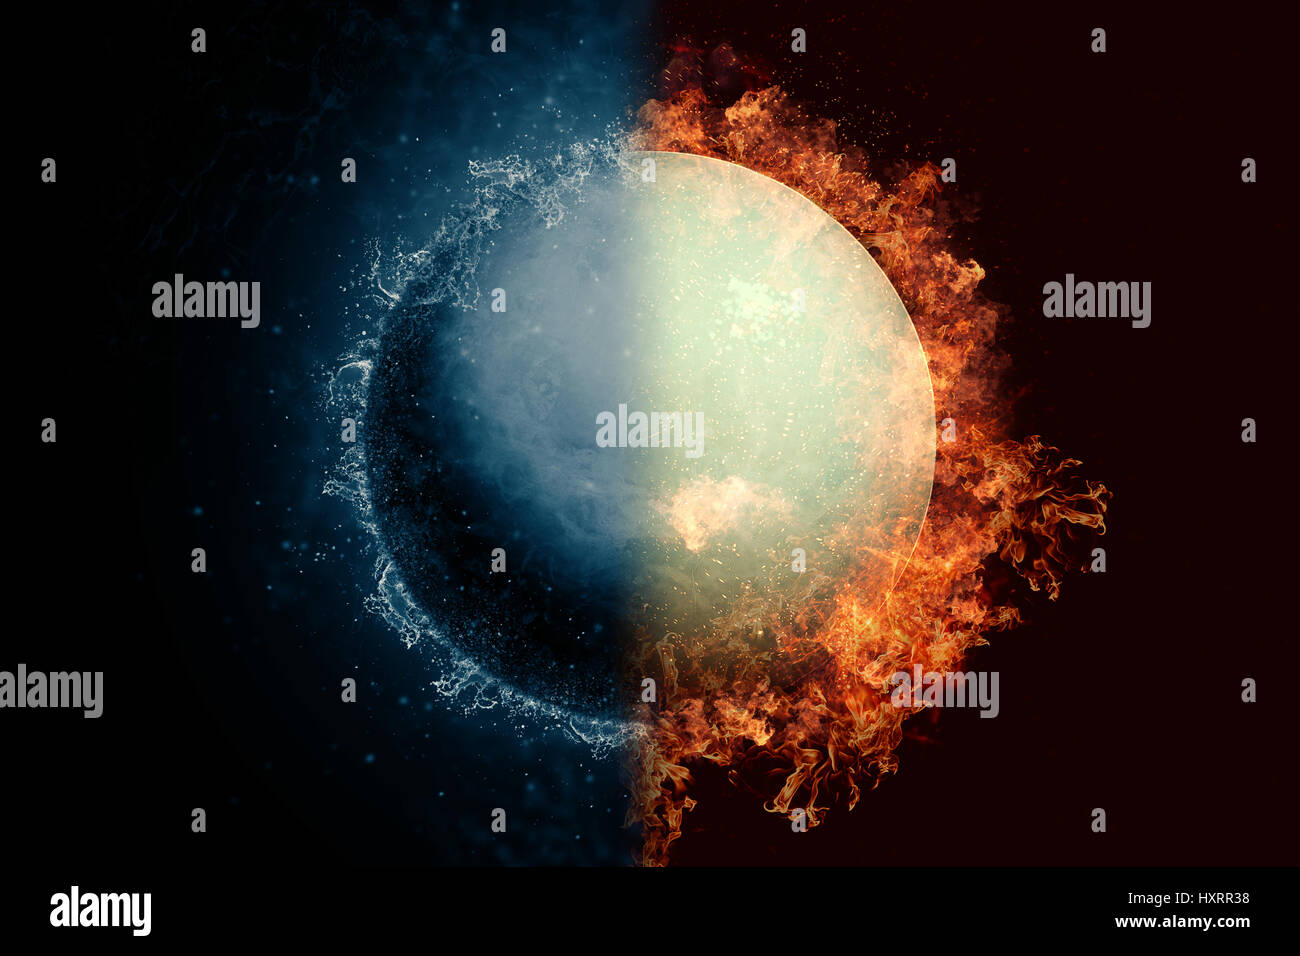 Planet Uranus in water and fire. Concept sci-fi artwork. Stock Photo